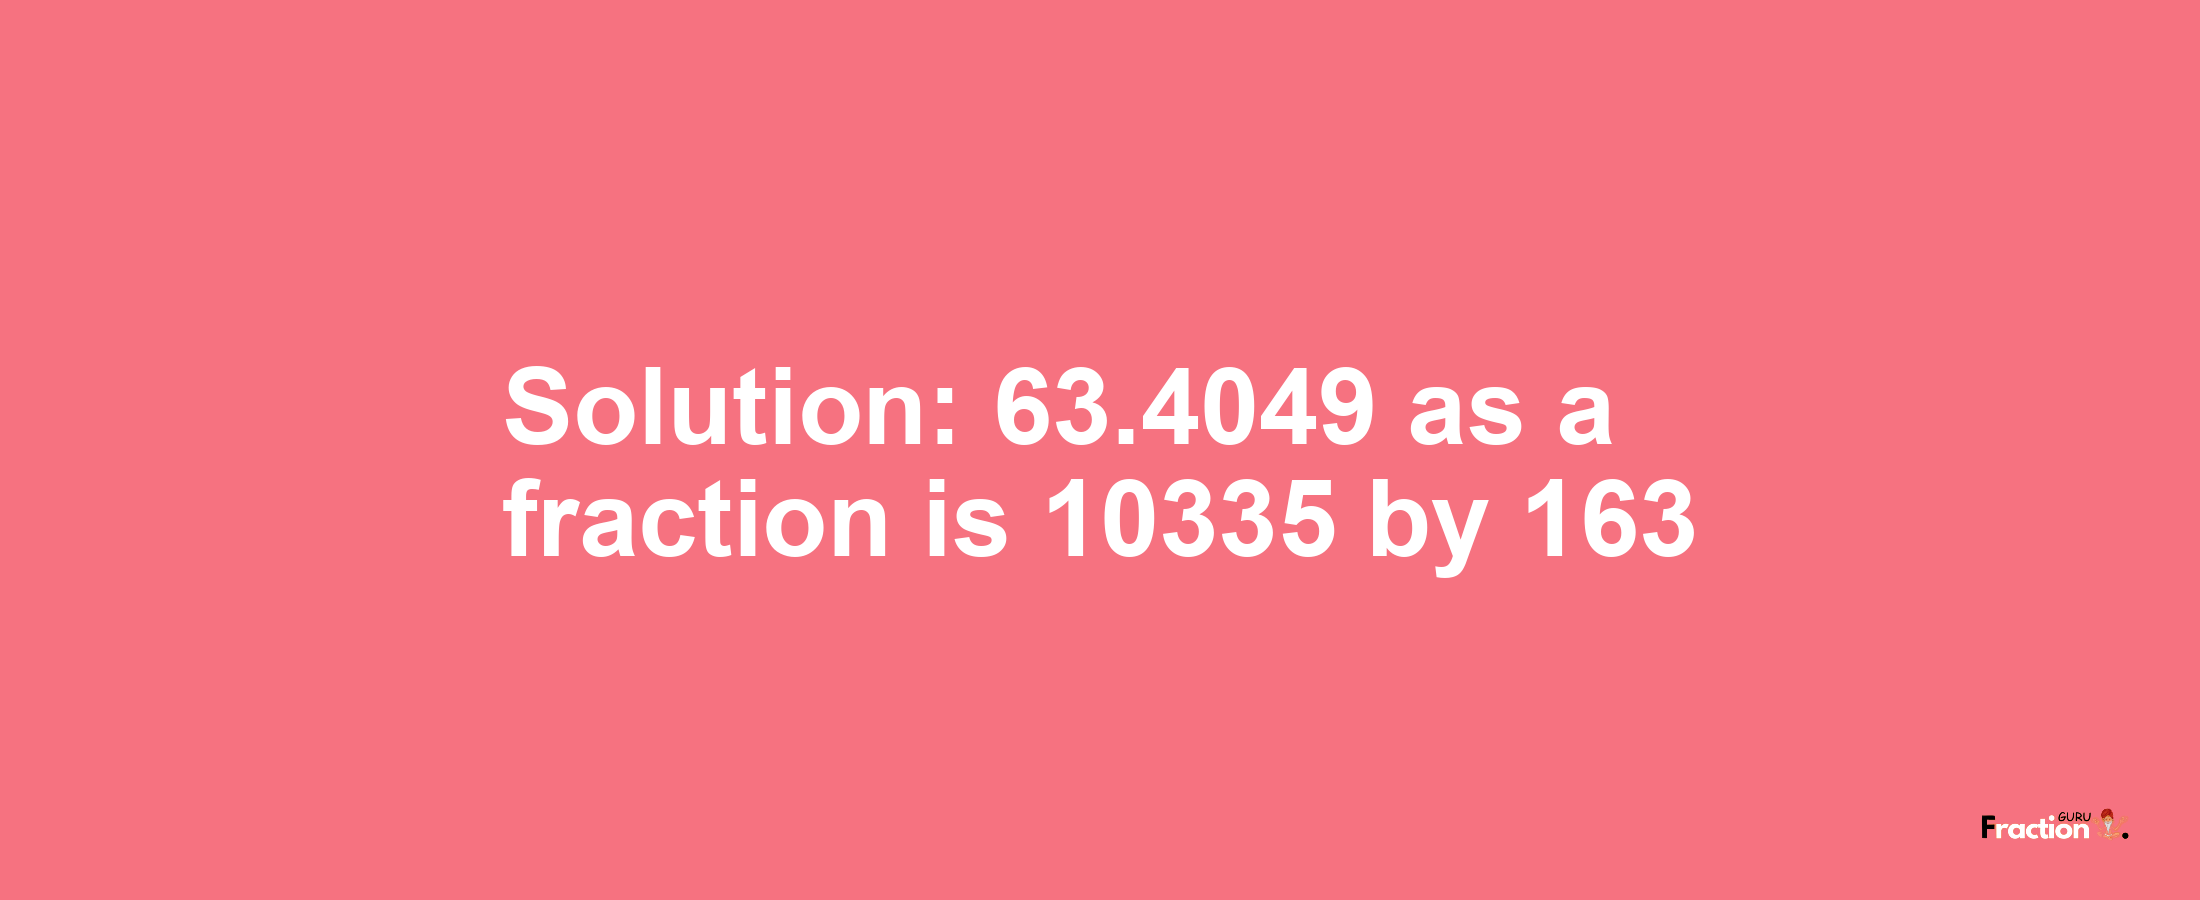 Solution:63.4049 as a fraction is 10335/163